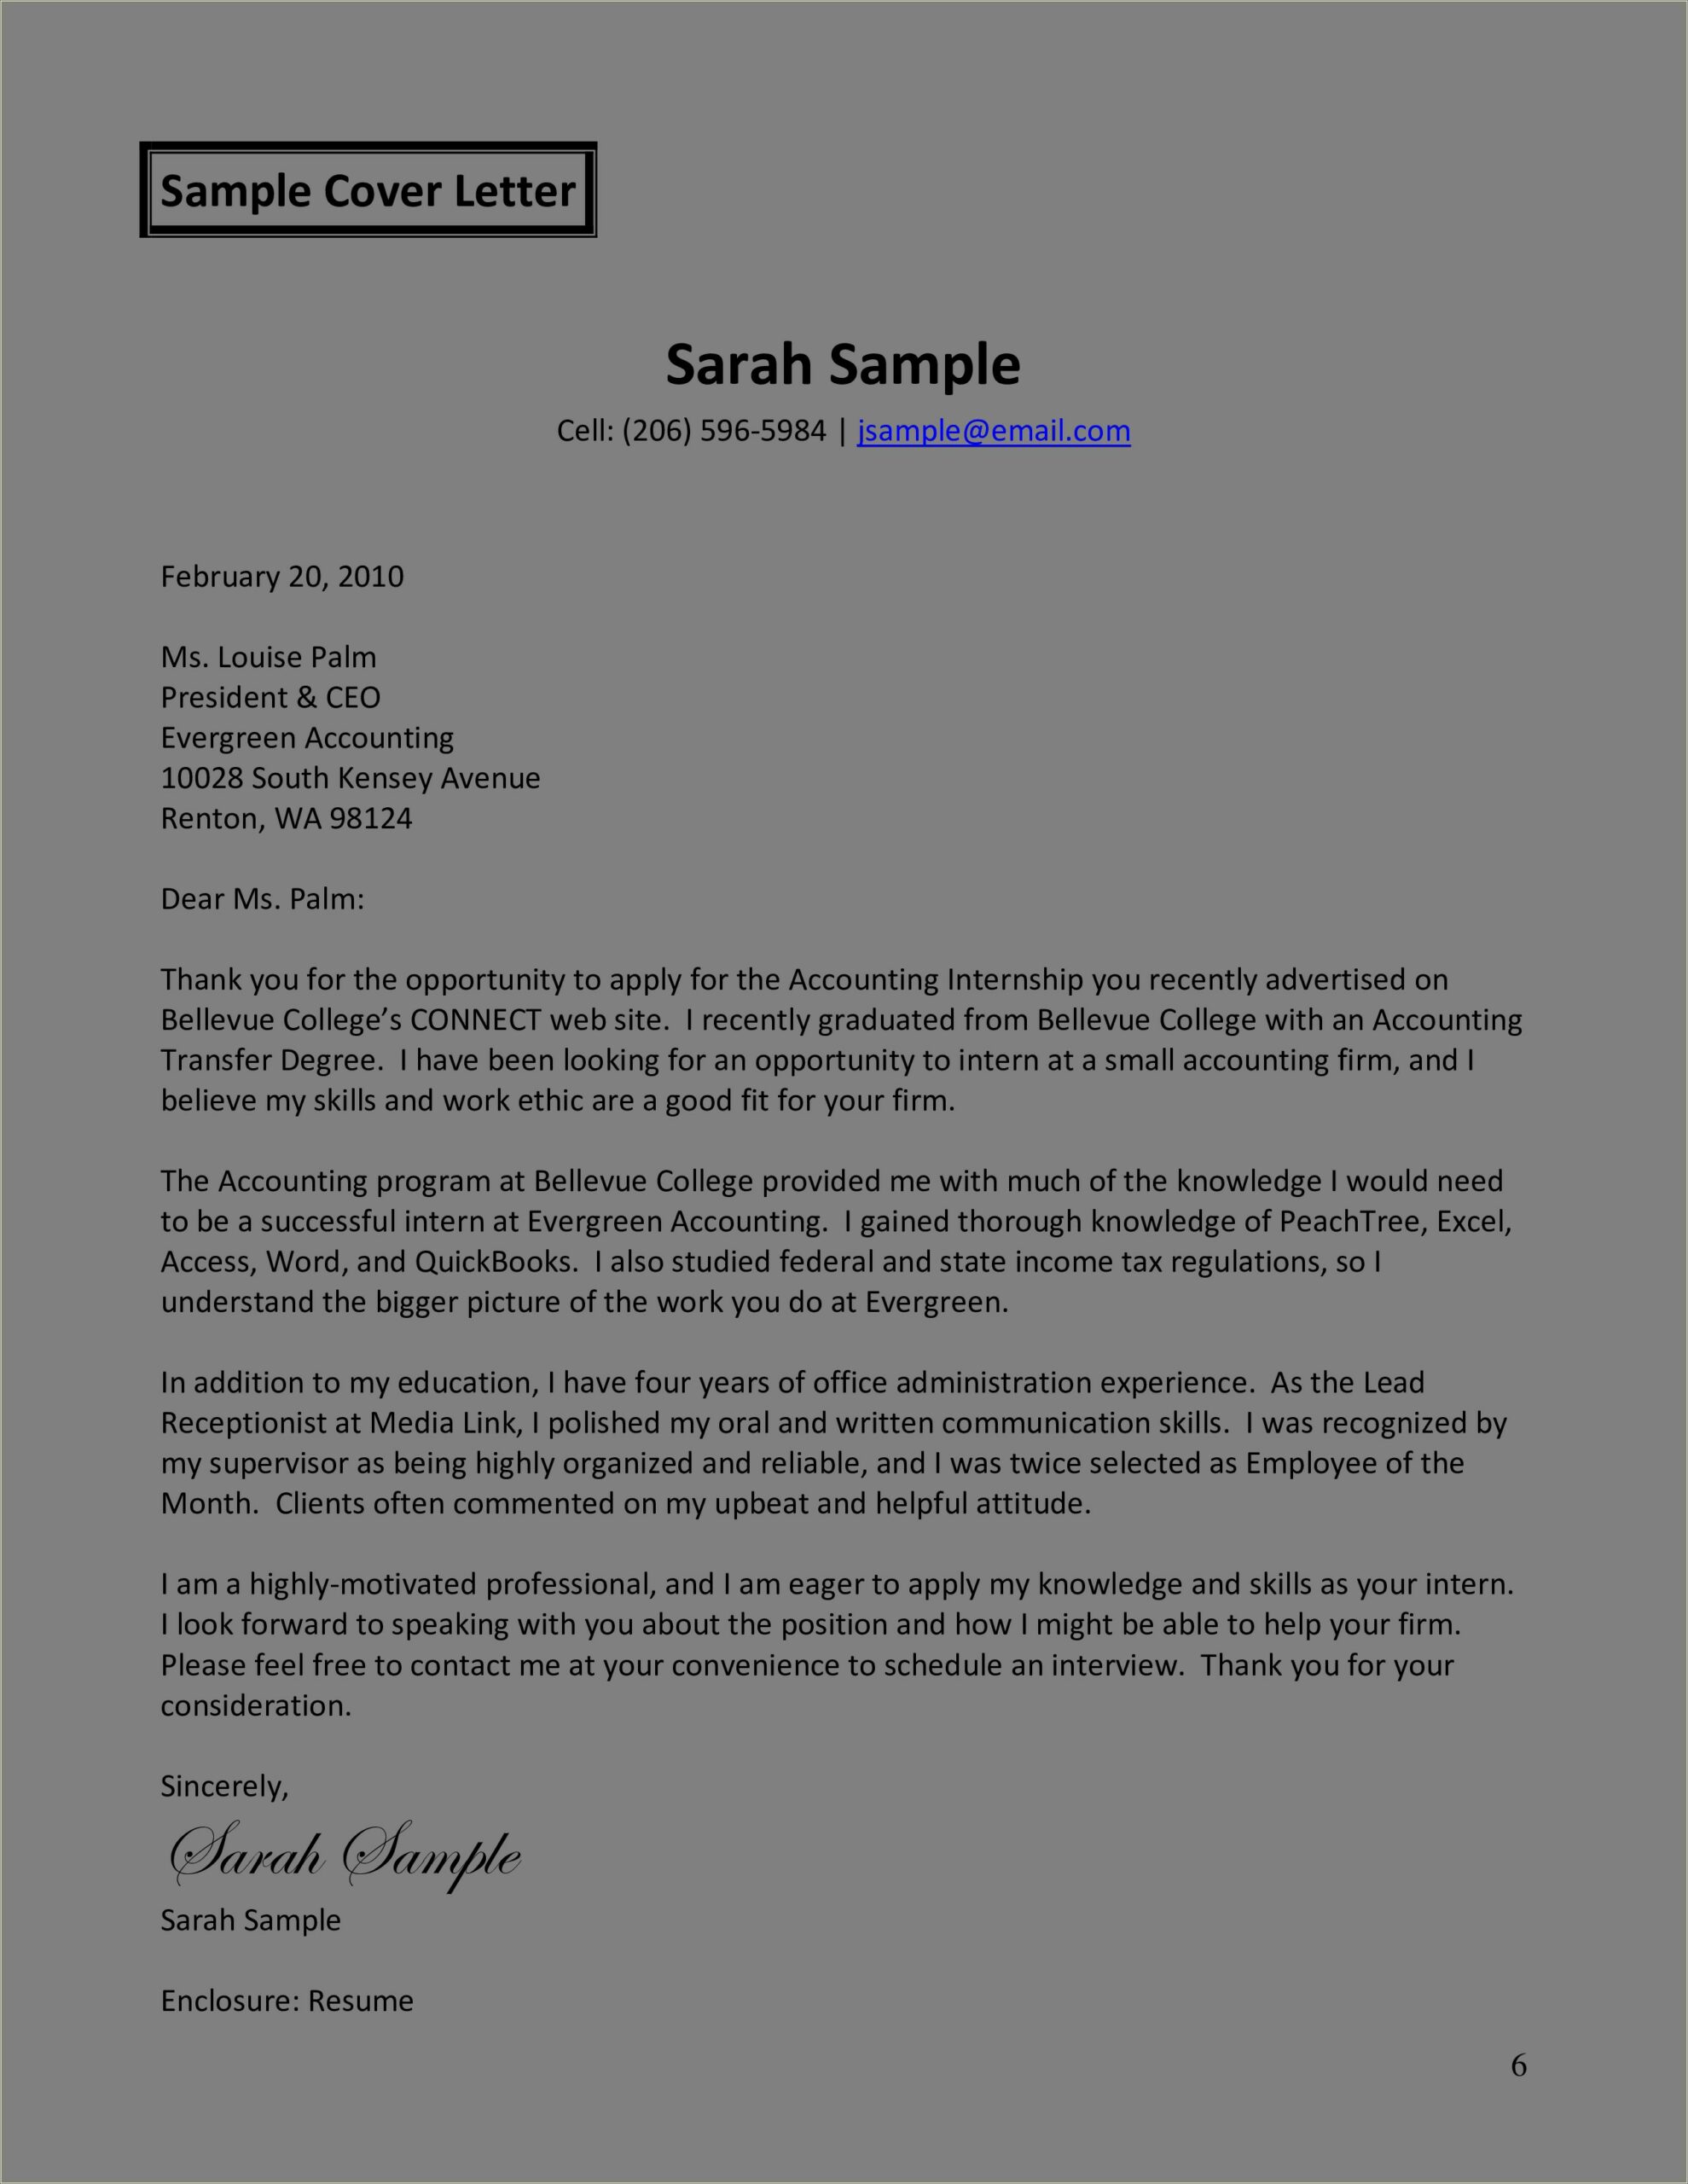 Examples Of Resume Thank You Letters